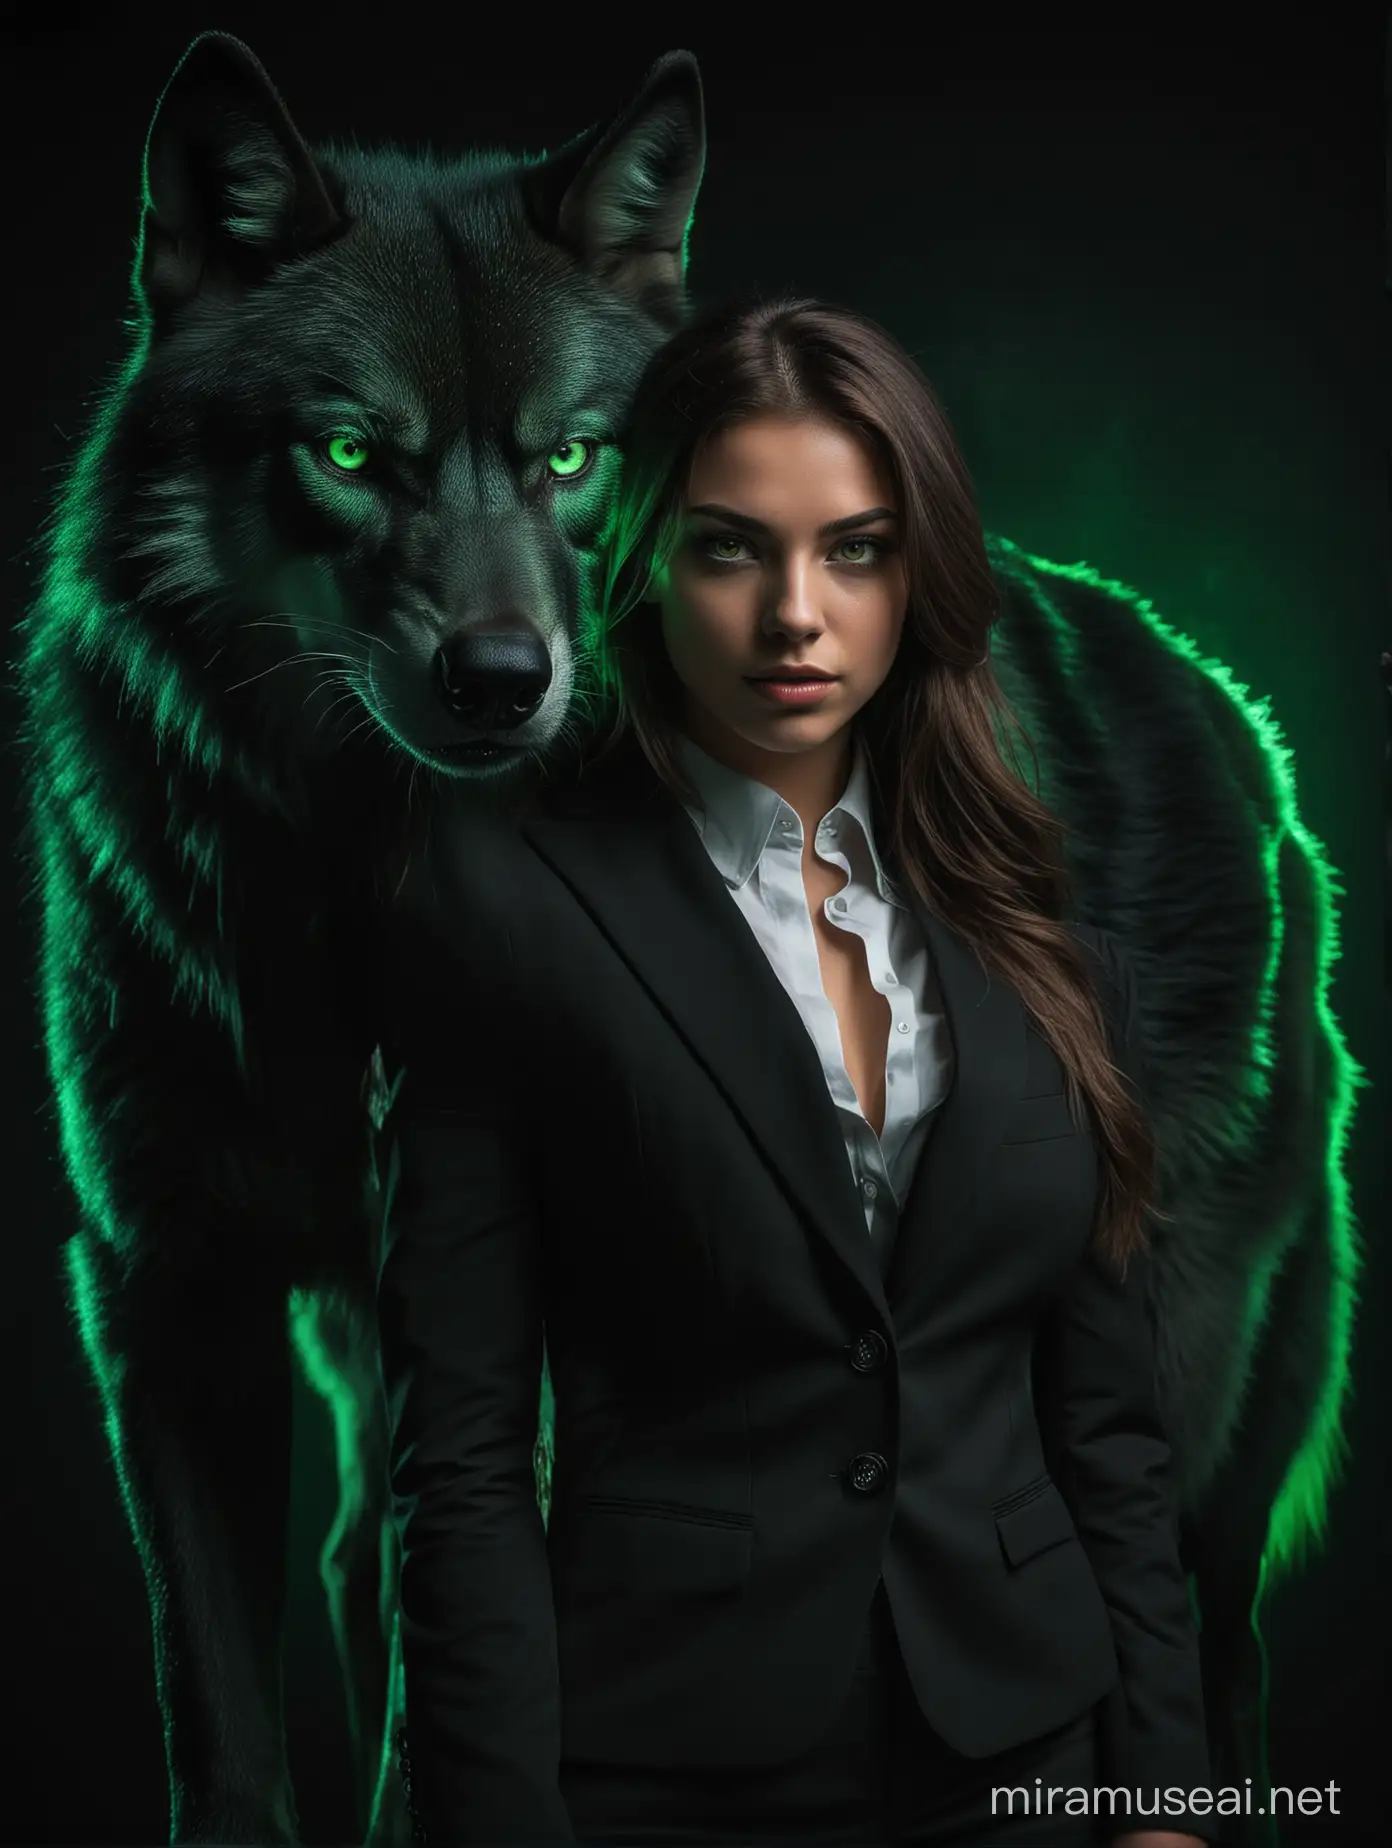 A hot beautiful young lady in a black fitted suit and green glowing eyes, standing close to a large green fearsome wolf, with a deep black wall behind them.